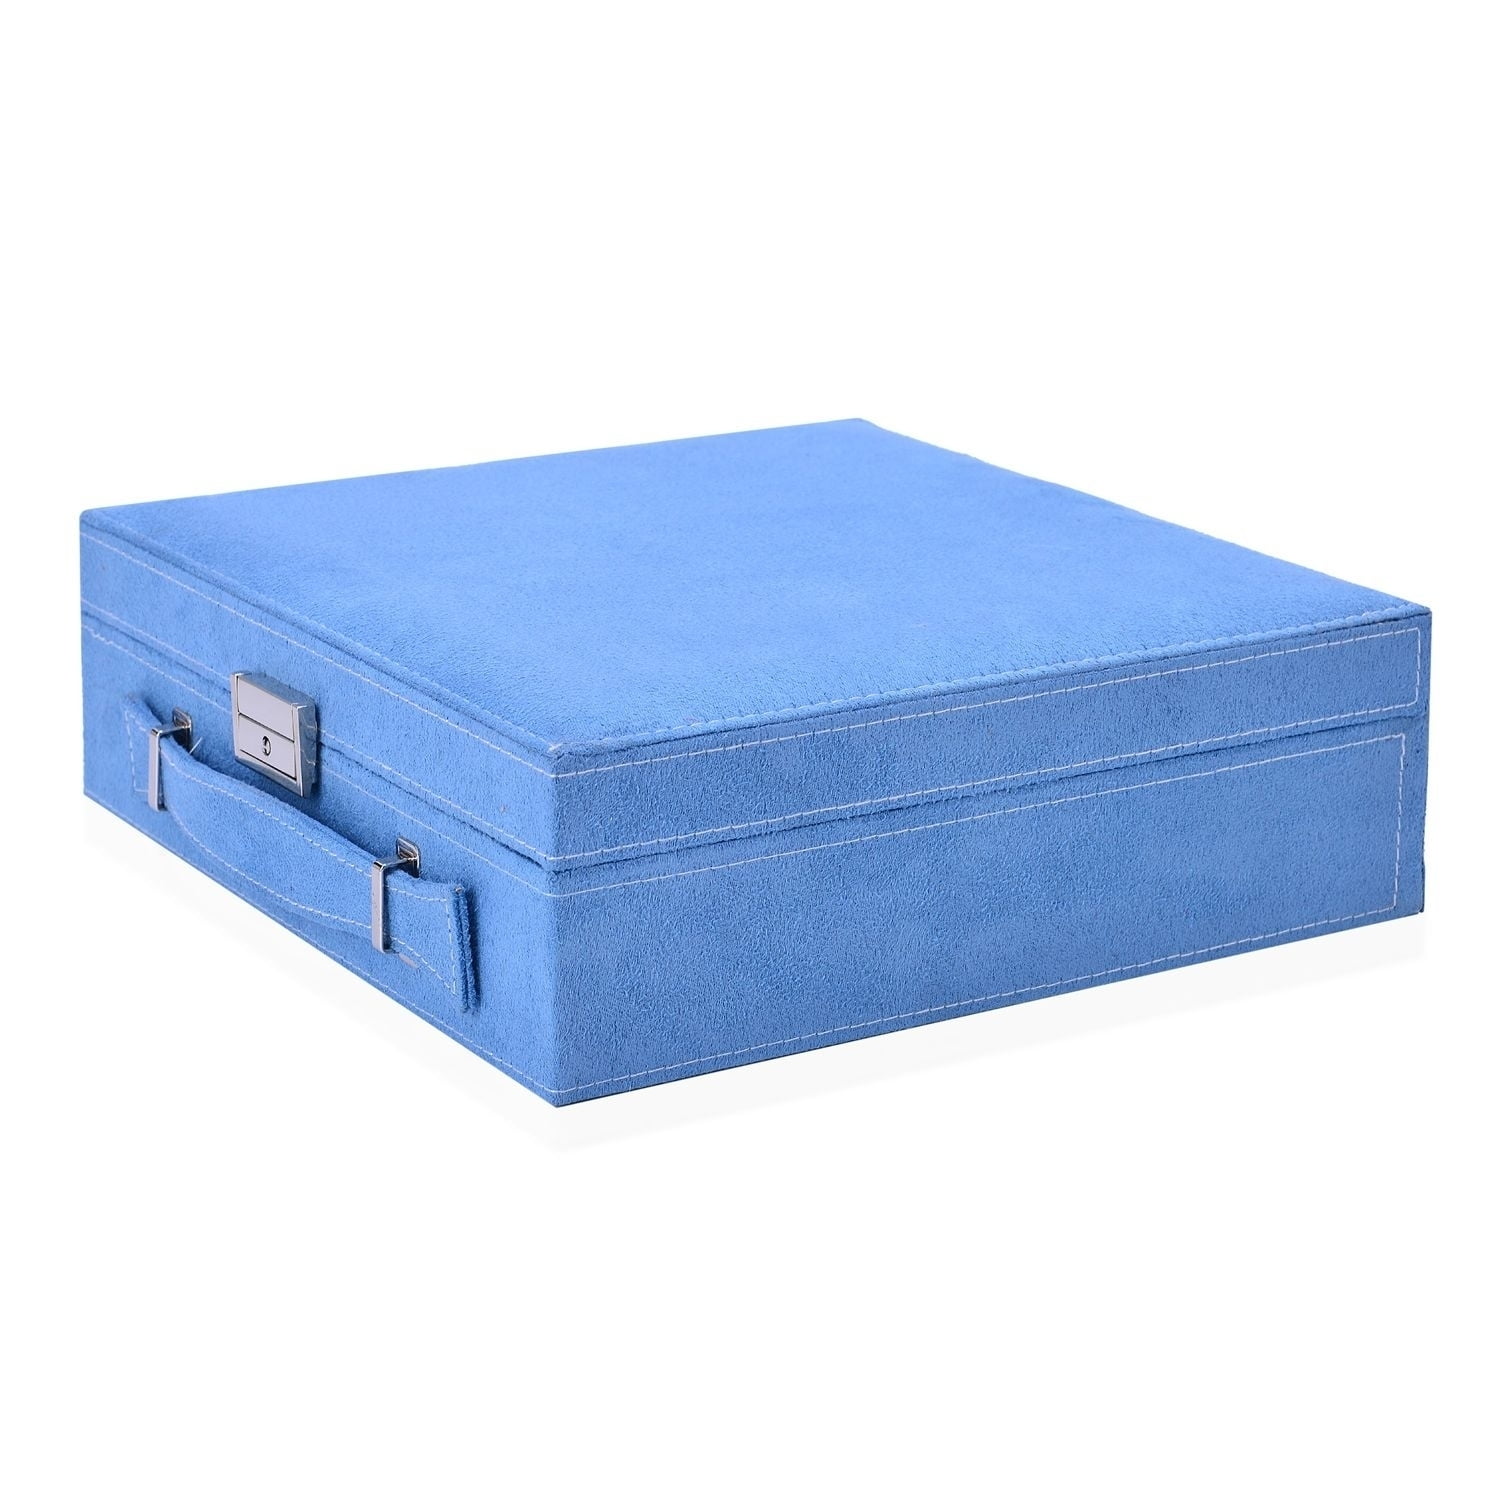  Gossiribbn Jewelry Storage Bag Anti Tarnish Portable PU Leather  Foldable Jewelry Storage Roll for Earrings, Necklaces, Rings, Bracelets,  Brooches (Blue,16 * 14 * 4.5 cm /6.3 * 5.5 * 1.77 in) : Clothing, Shoes &  Jewelry